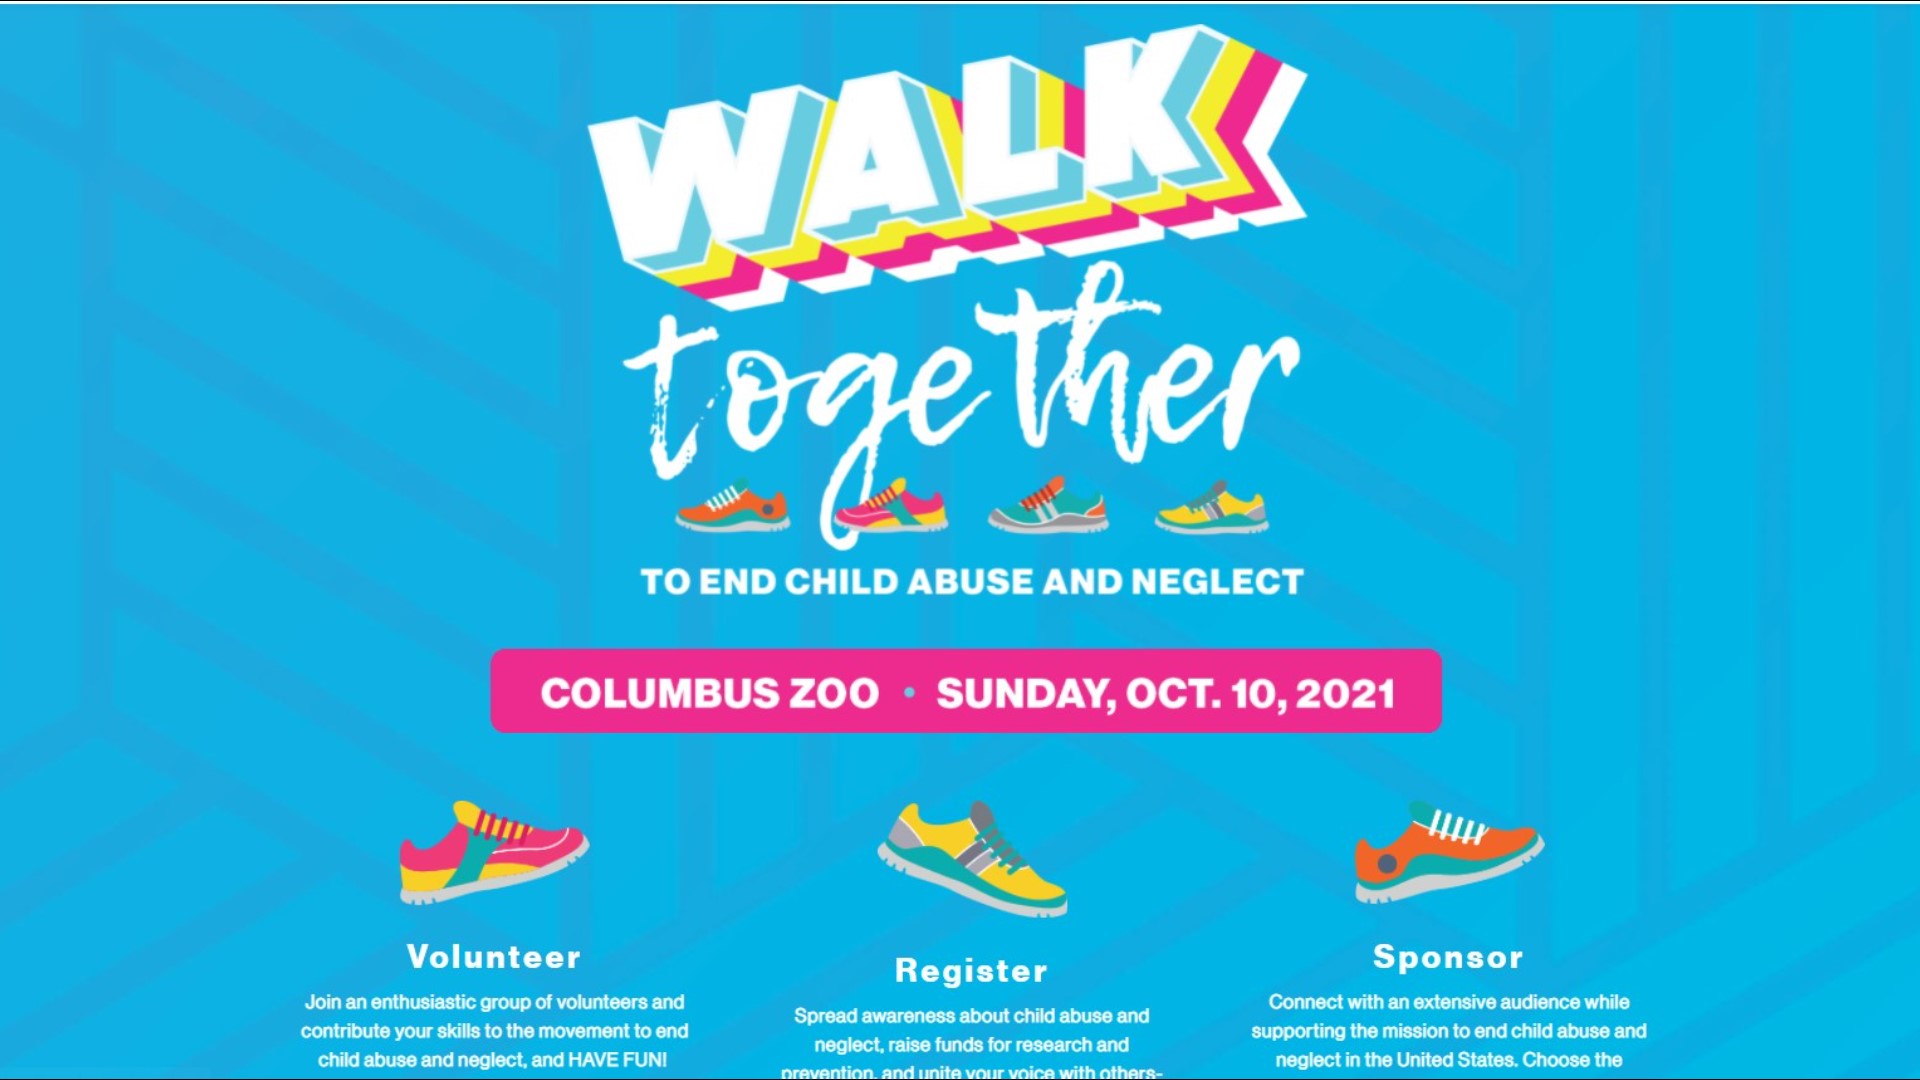 The walk takes place at the Columbus Zoo on October 10.